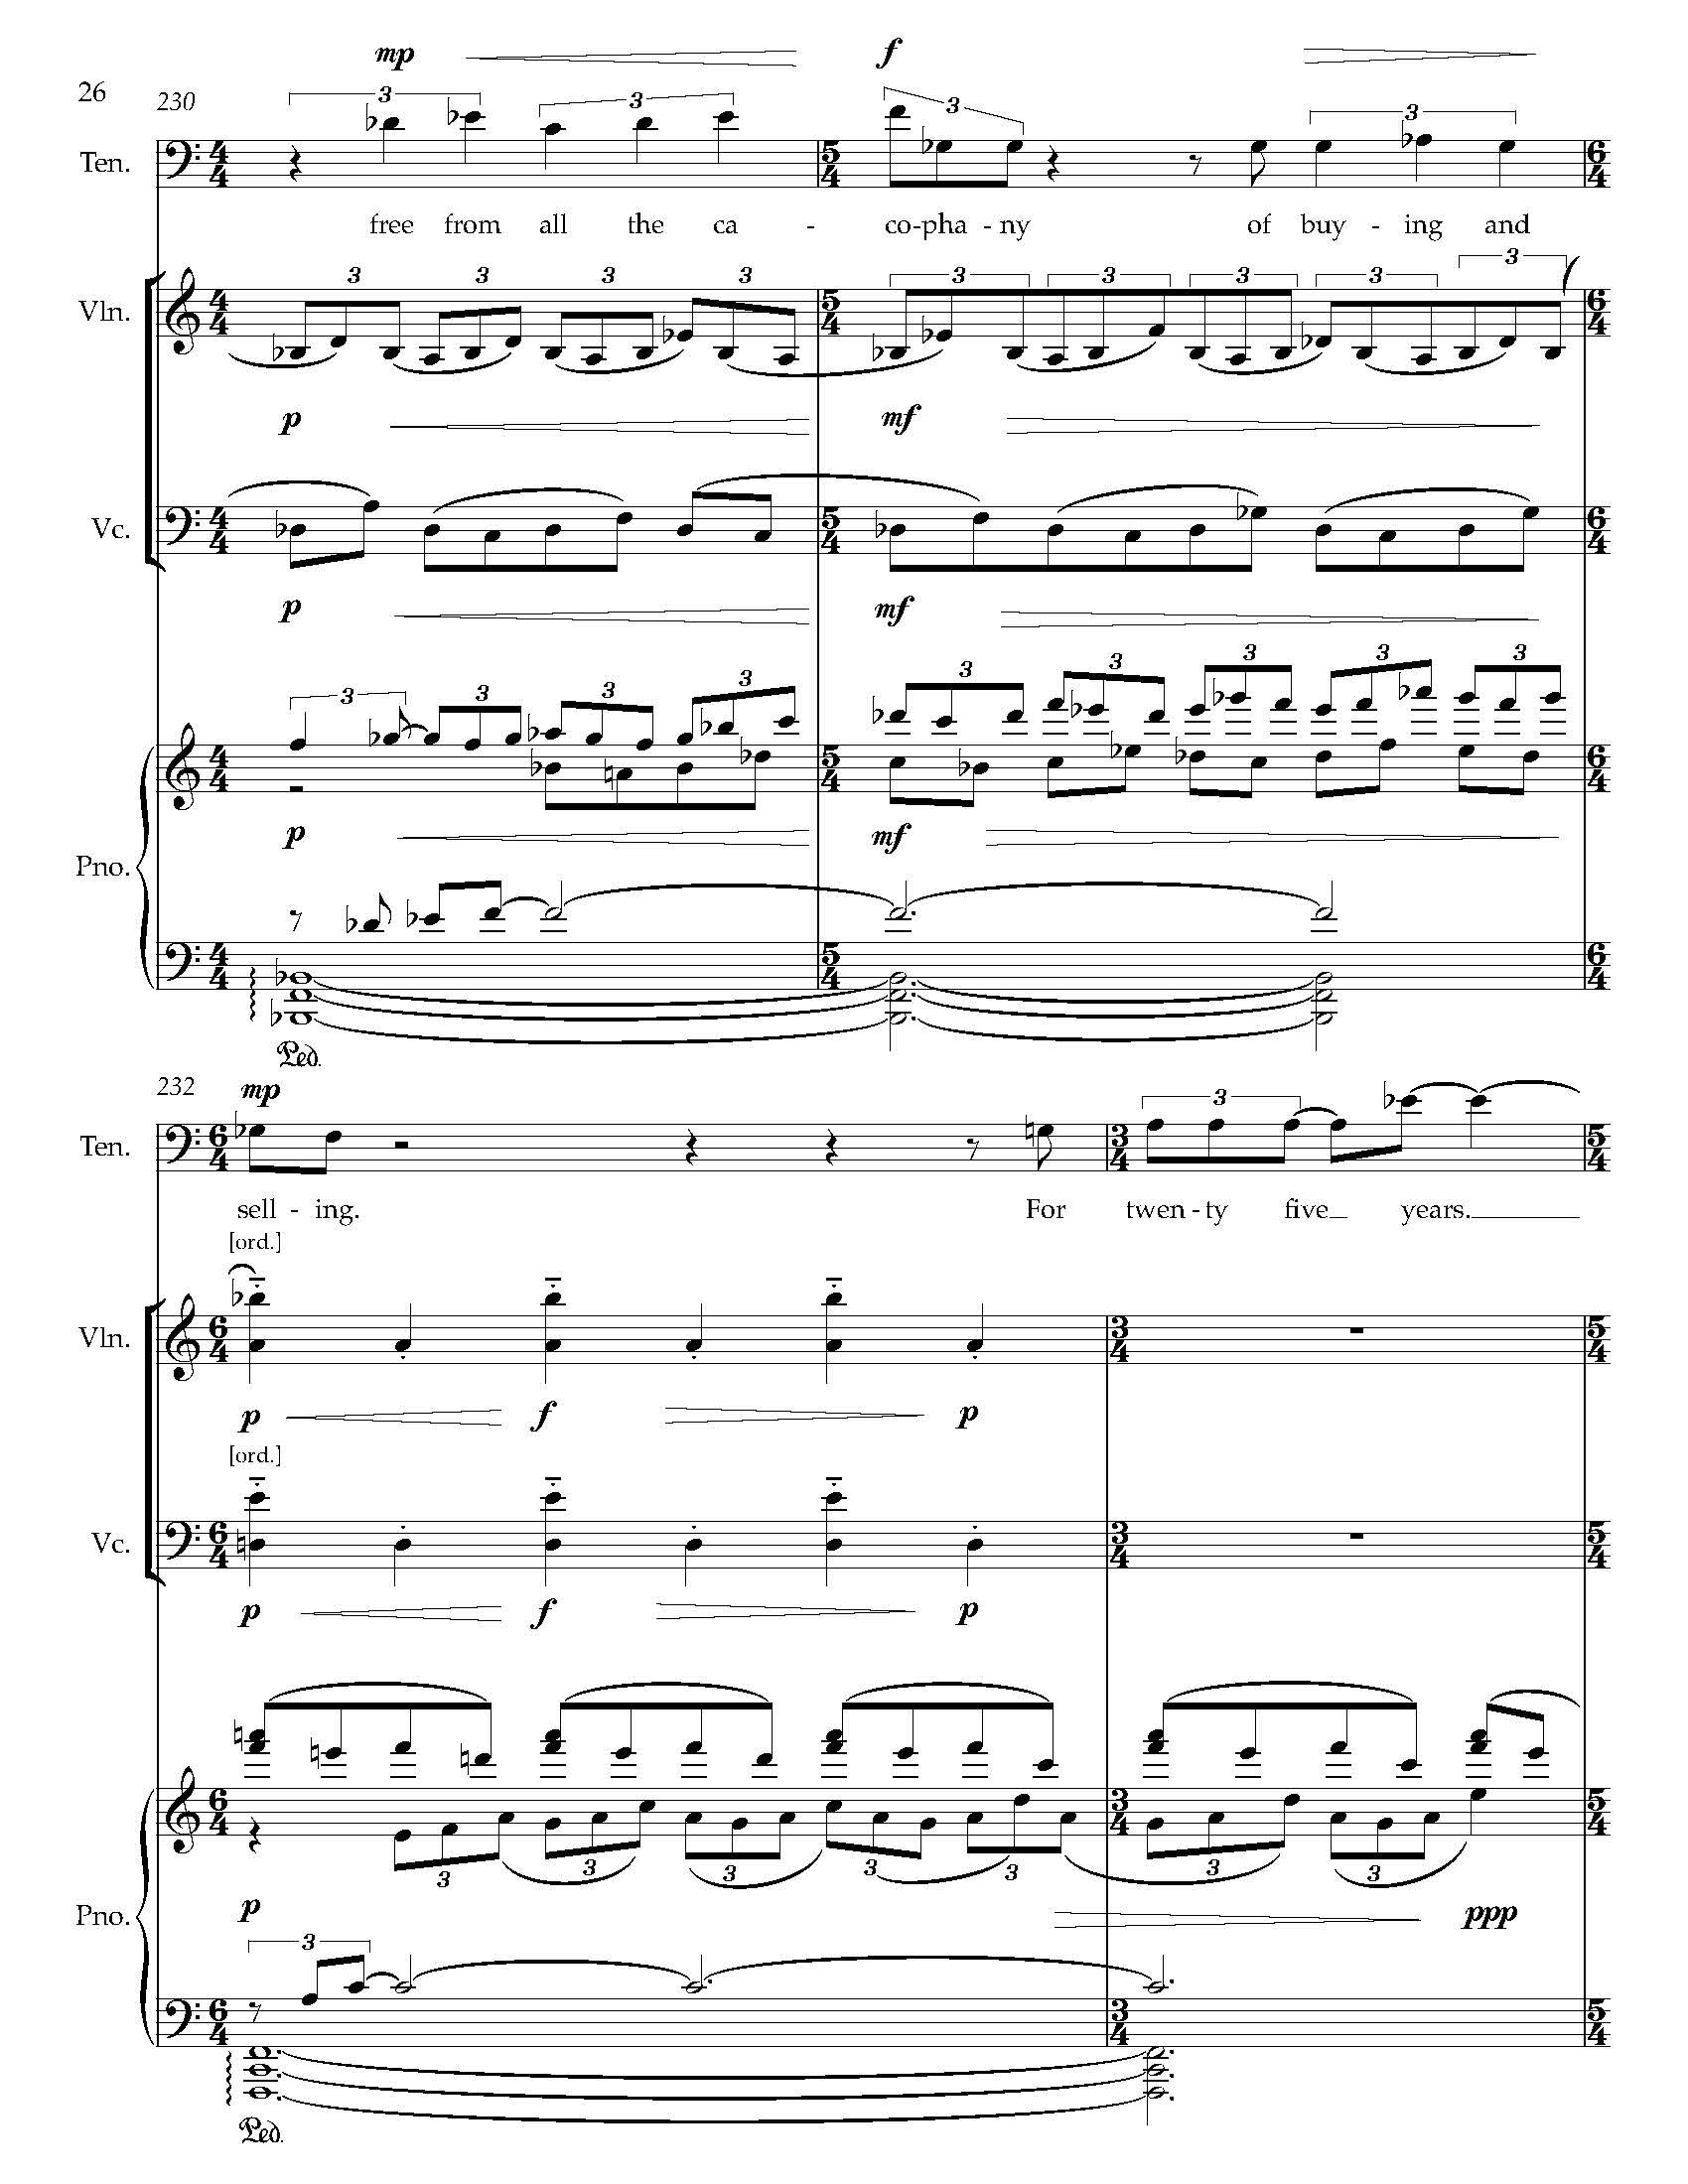 Gursky Songs - Complete Score_Page_34.jpg